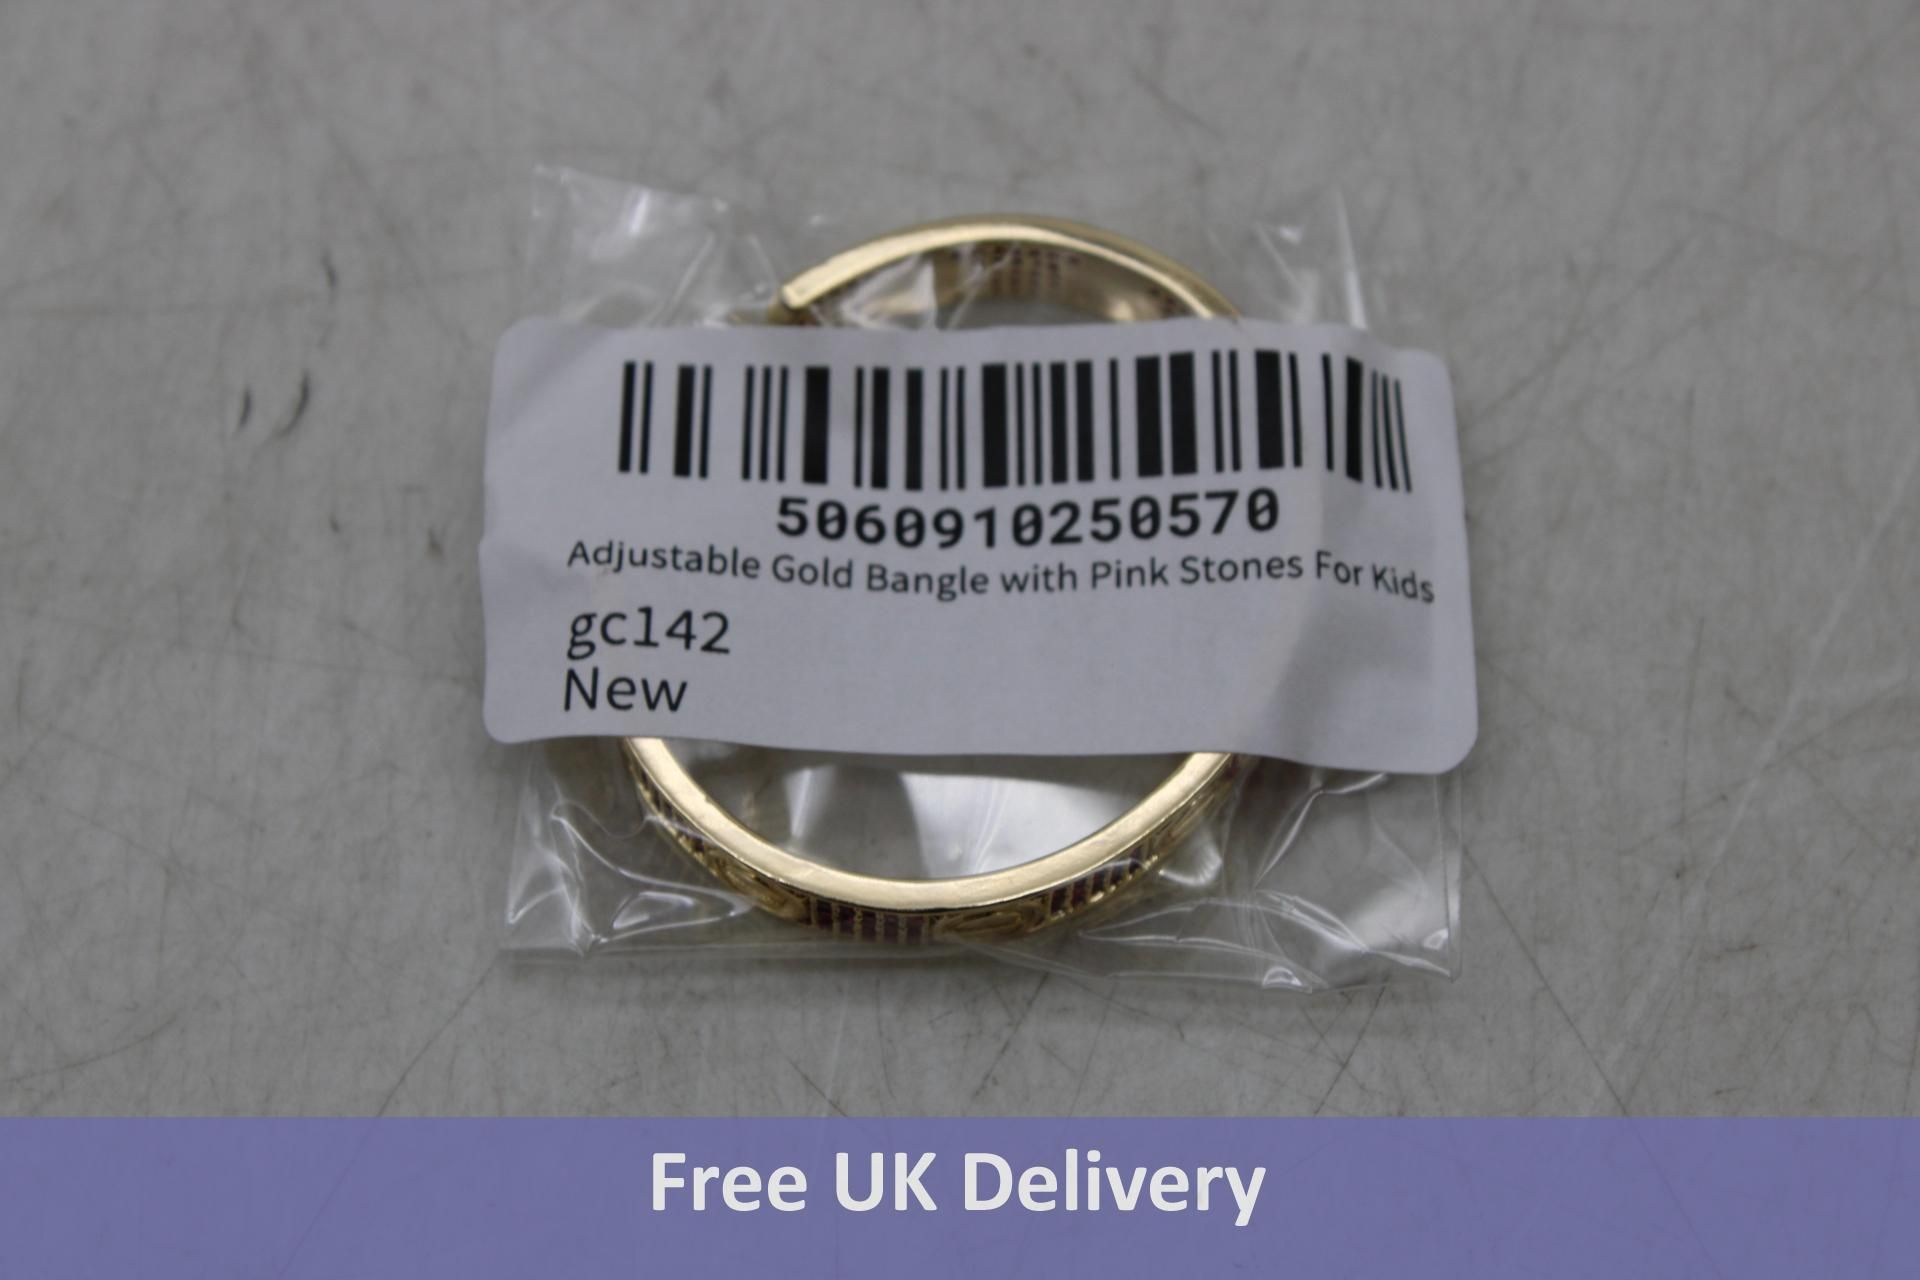 Four Adjustable Kids Bangles with Pink Stones, Gold Colour, GC142 - Image 4 of 4